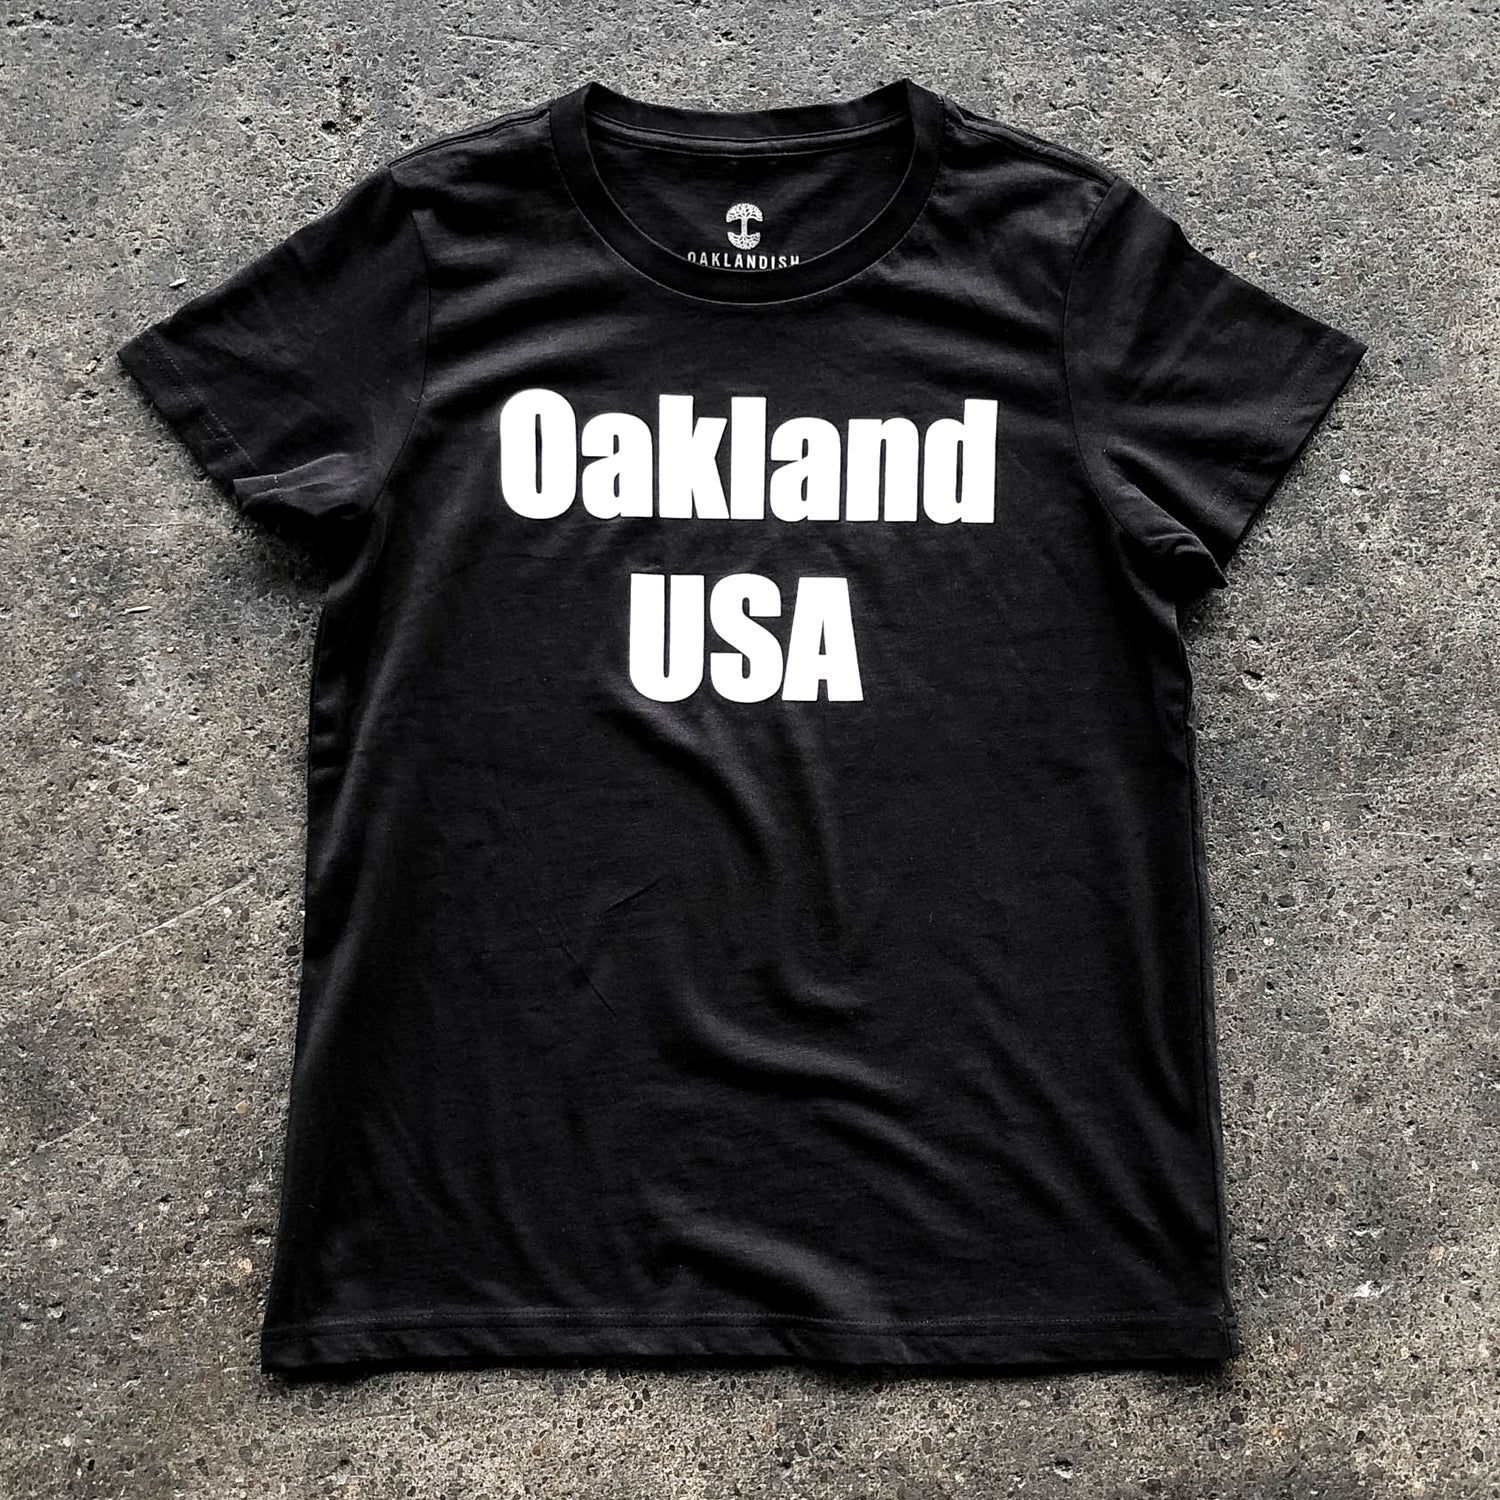 A women’s black t-shirt with a large white Oakland USA wordmark logo on the chest laying on asphalt.